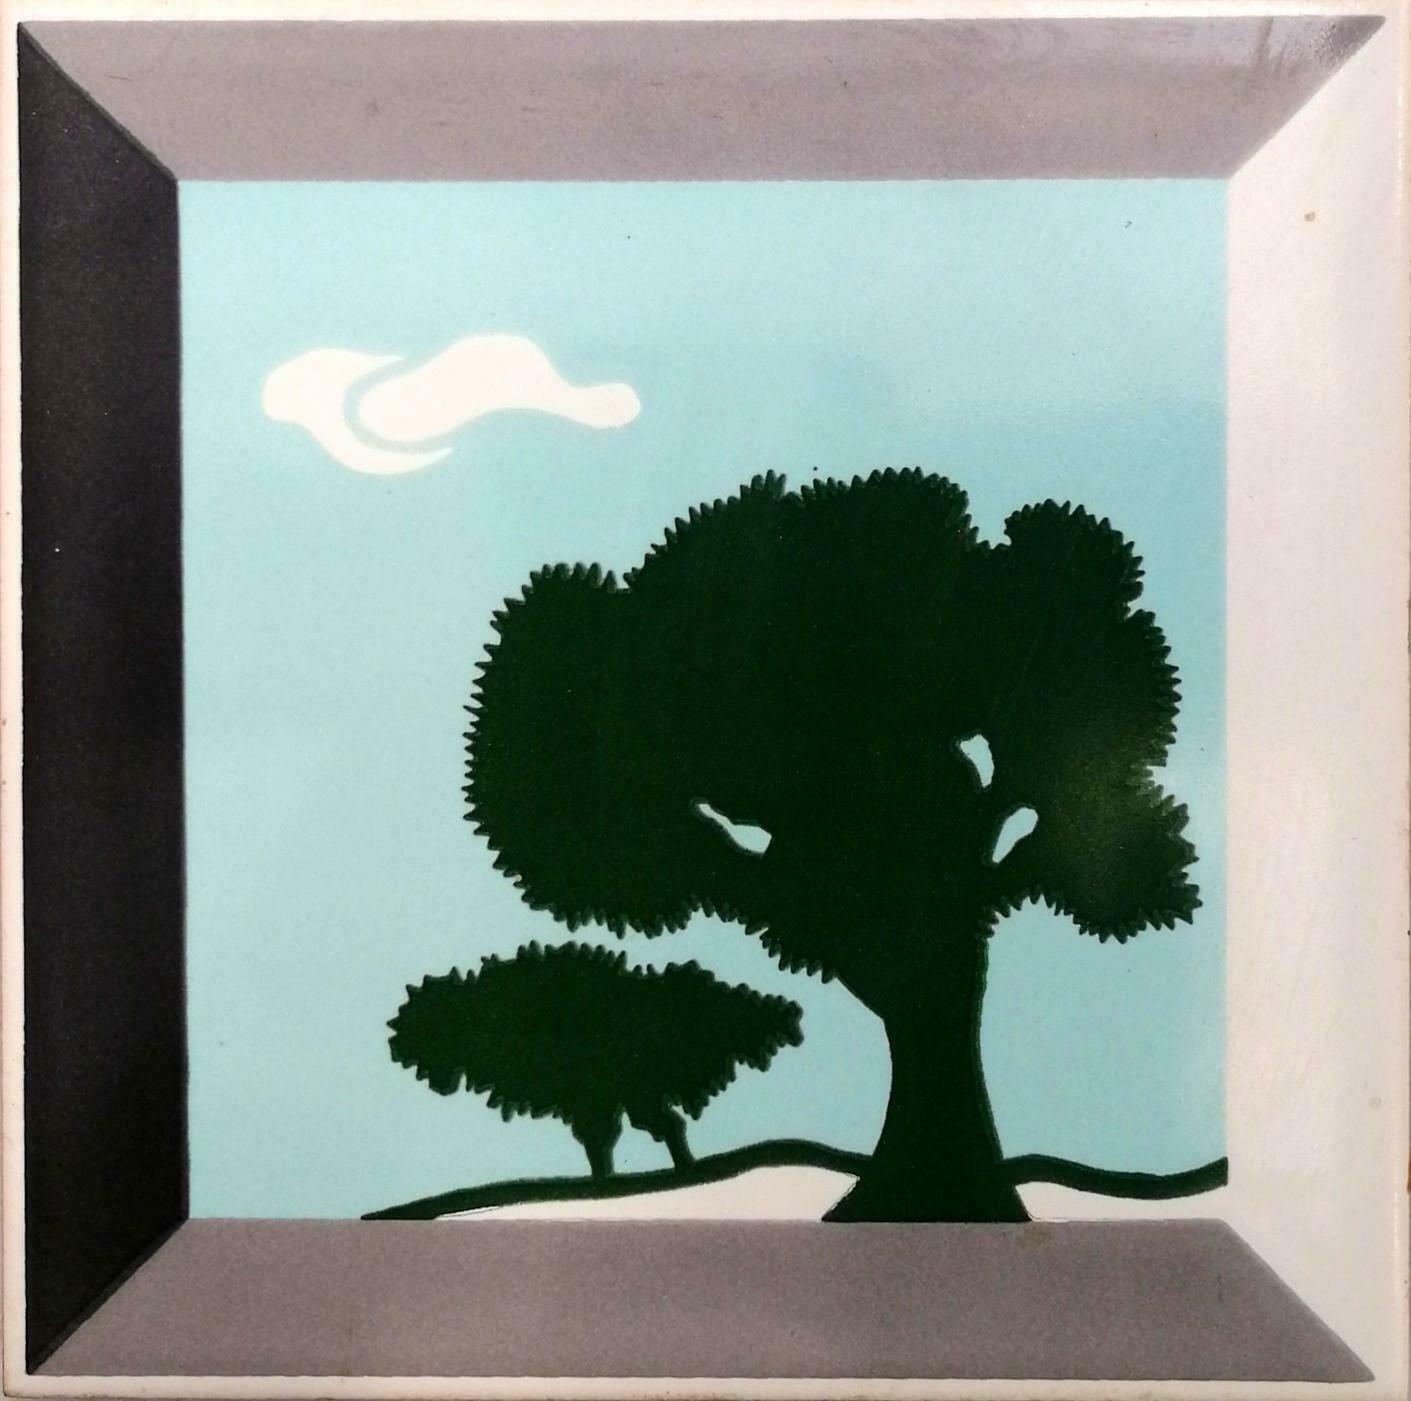 Extremely rare triptych of tiles produced by cedit ceramics from Italy, 1970s, designed by Sergio Asti

it is the same subject, a panorama with two trees, drawn in three different approached perspectives

each single tile measures 15.5 x 15.5